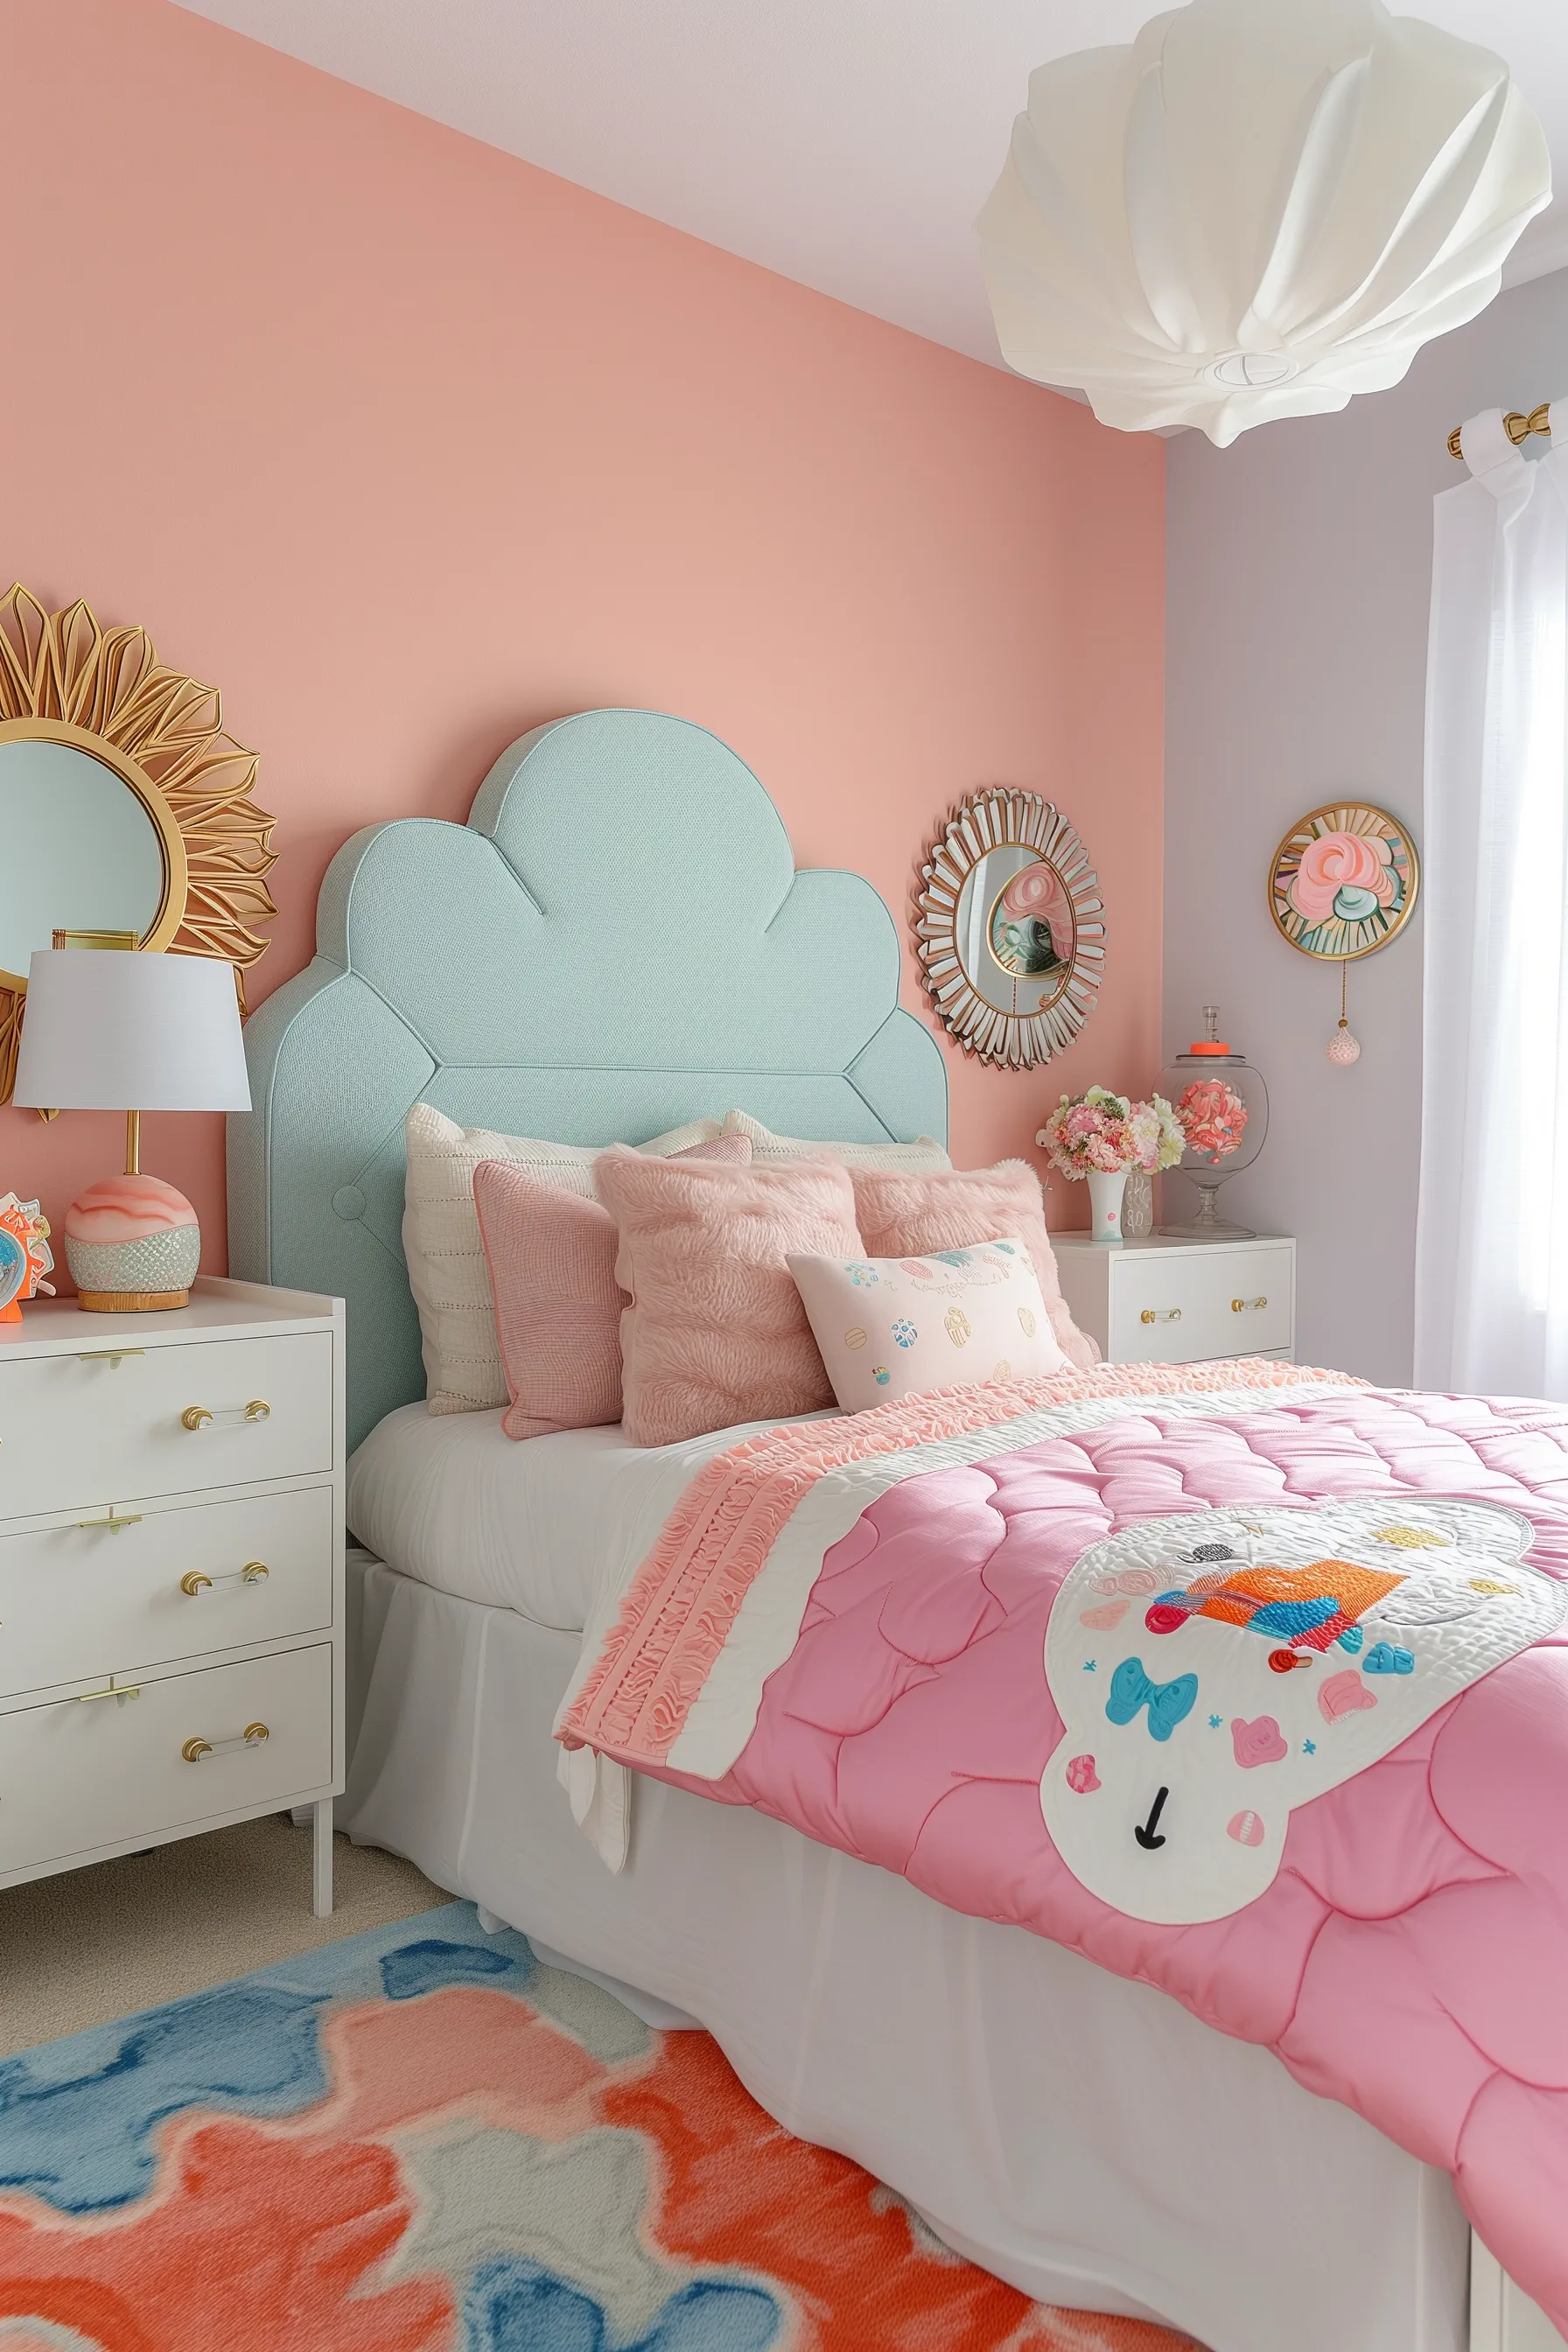 A brightly colored bedroom with lots of funky designs